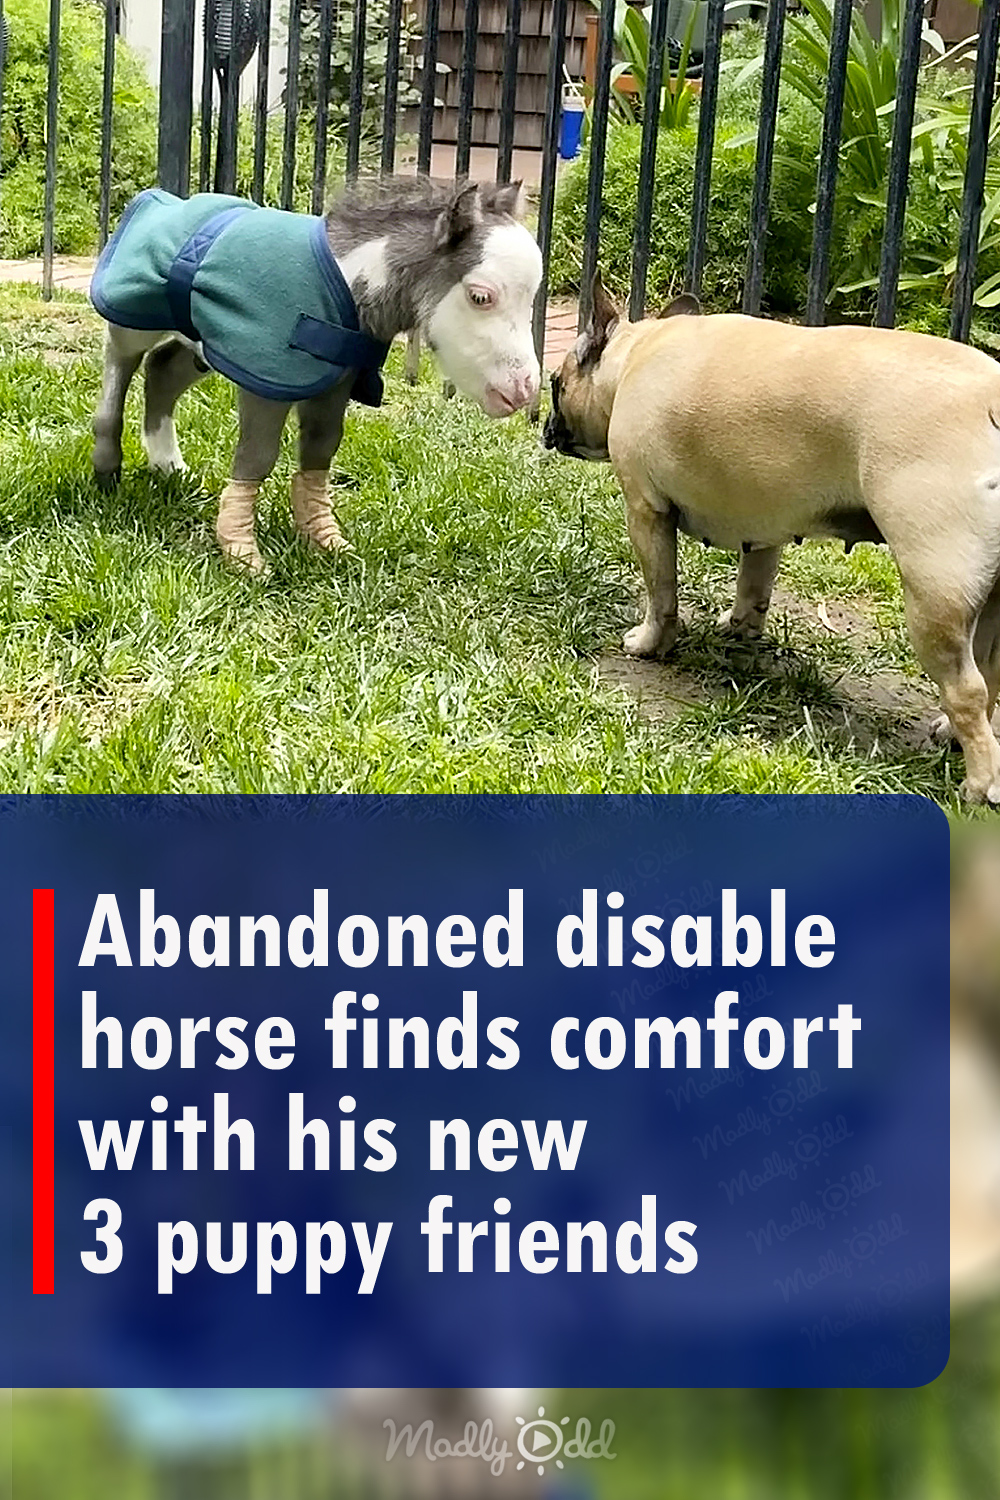 Abandoned disable horse finds comfort with his new 3 puppy friends